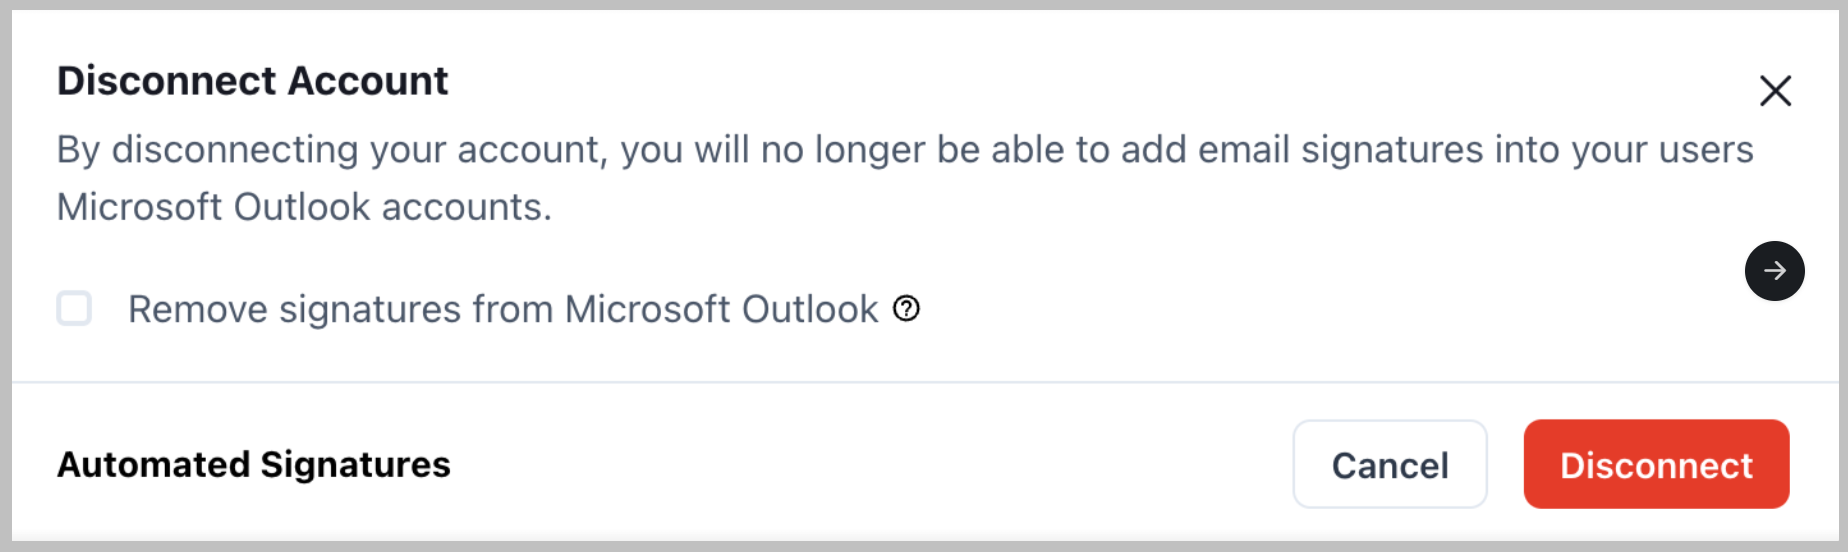 Disconnect account Outlook 2.png